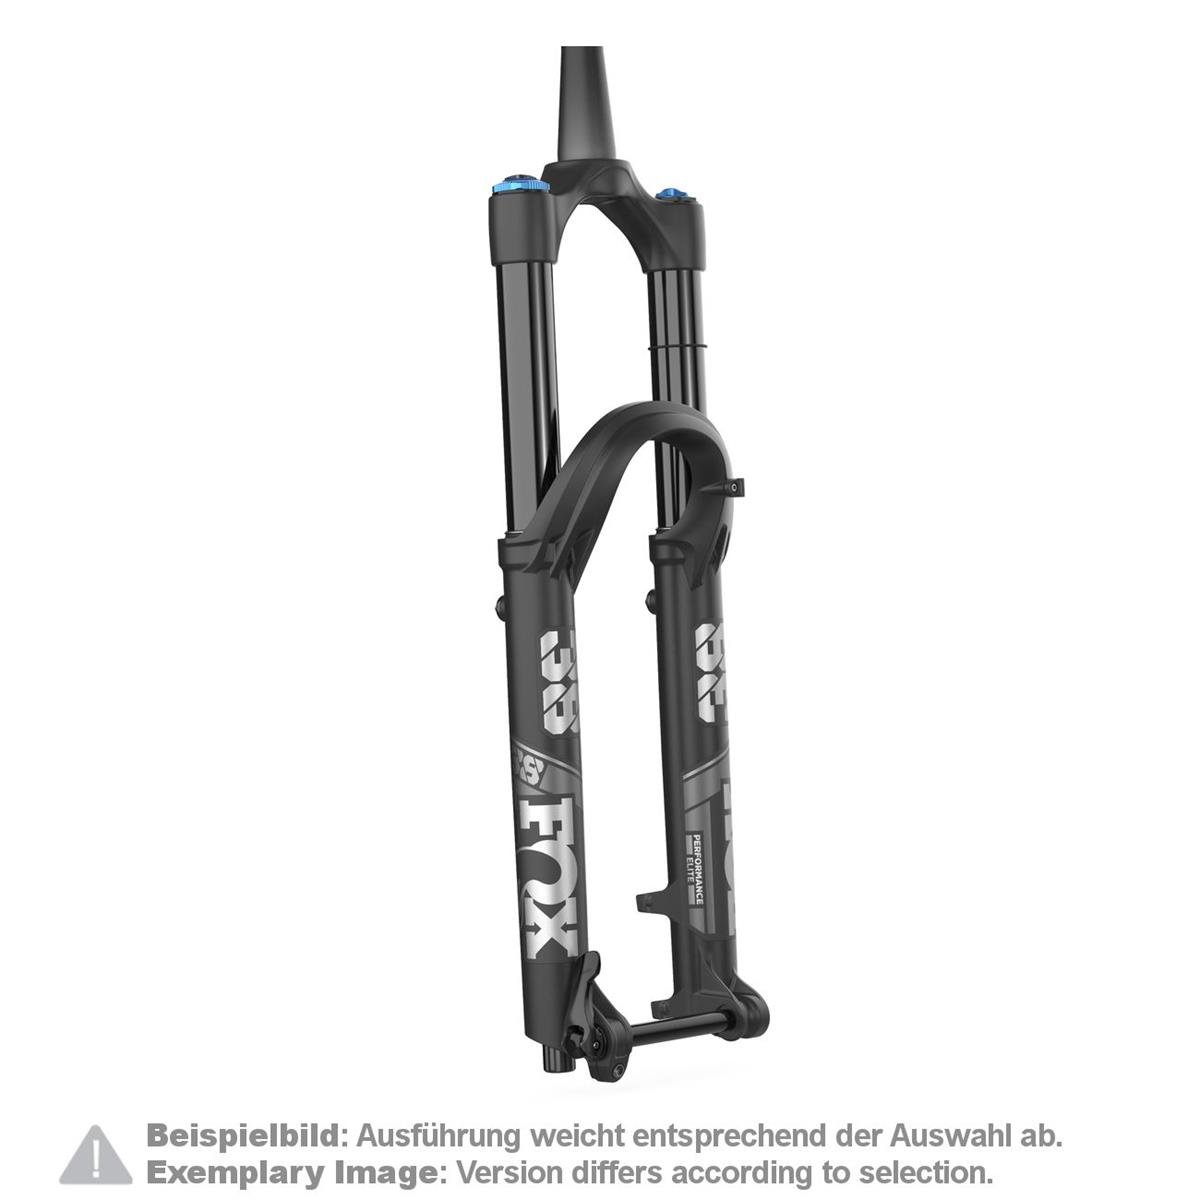 Fox Racing Shox Forcella 38 Float Performance Elite 27.5 Pollici, 15x110 mm, GRIP2, 44 mm Offset, 170 mm